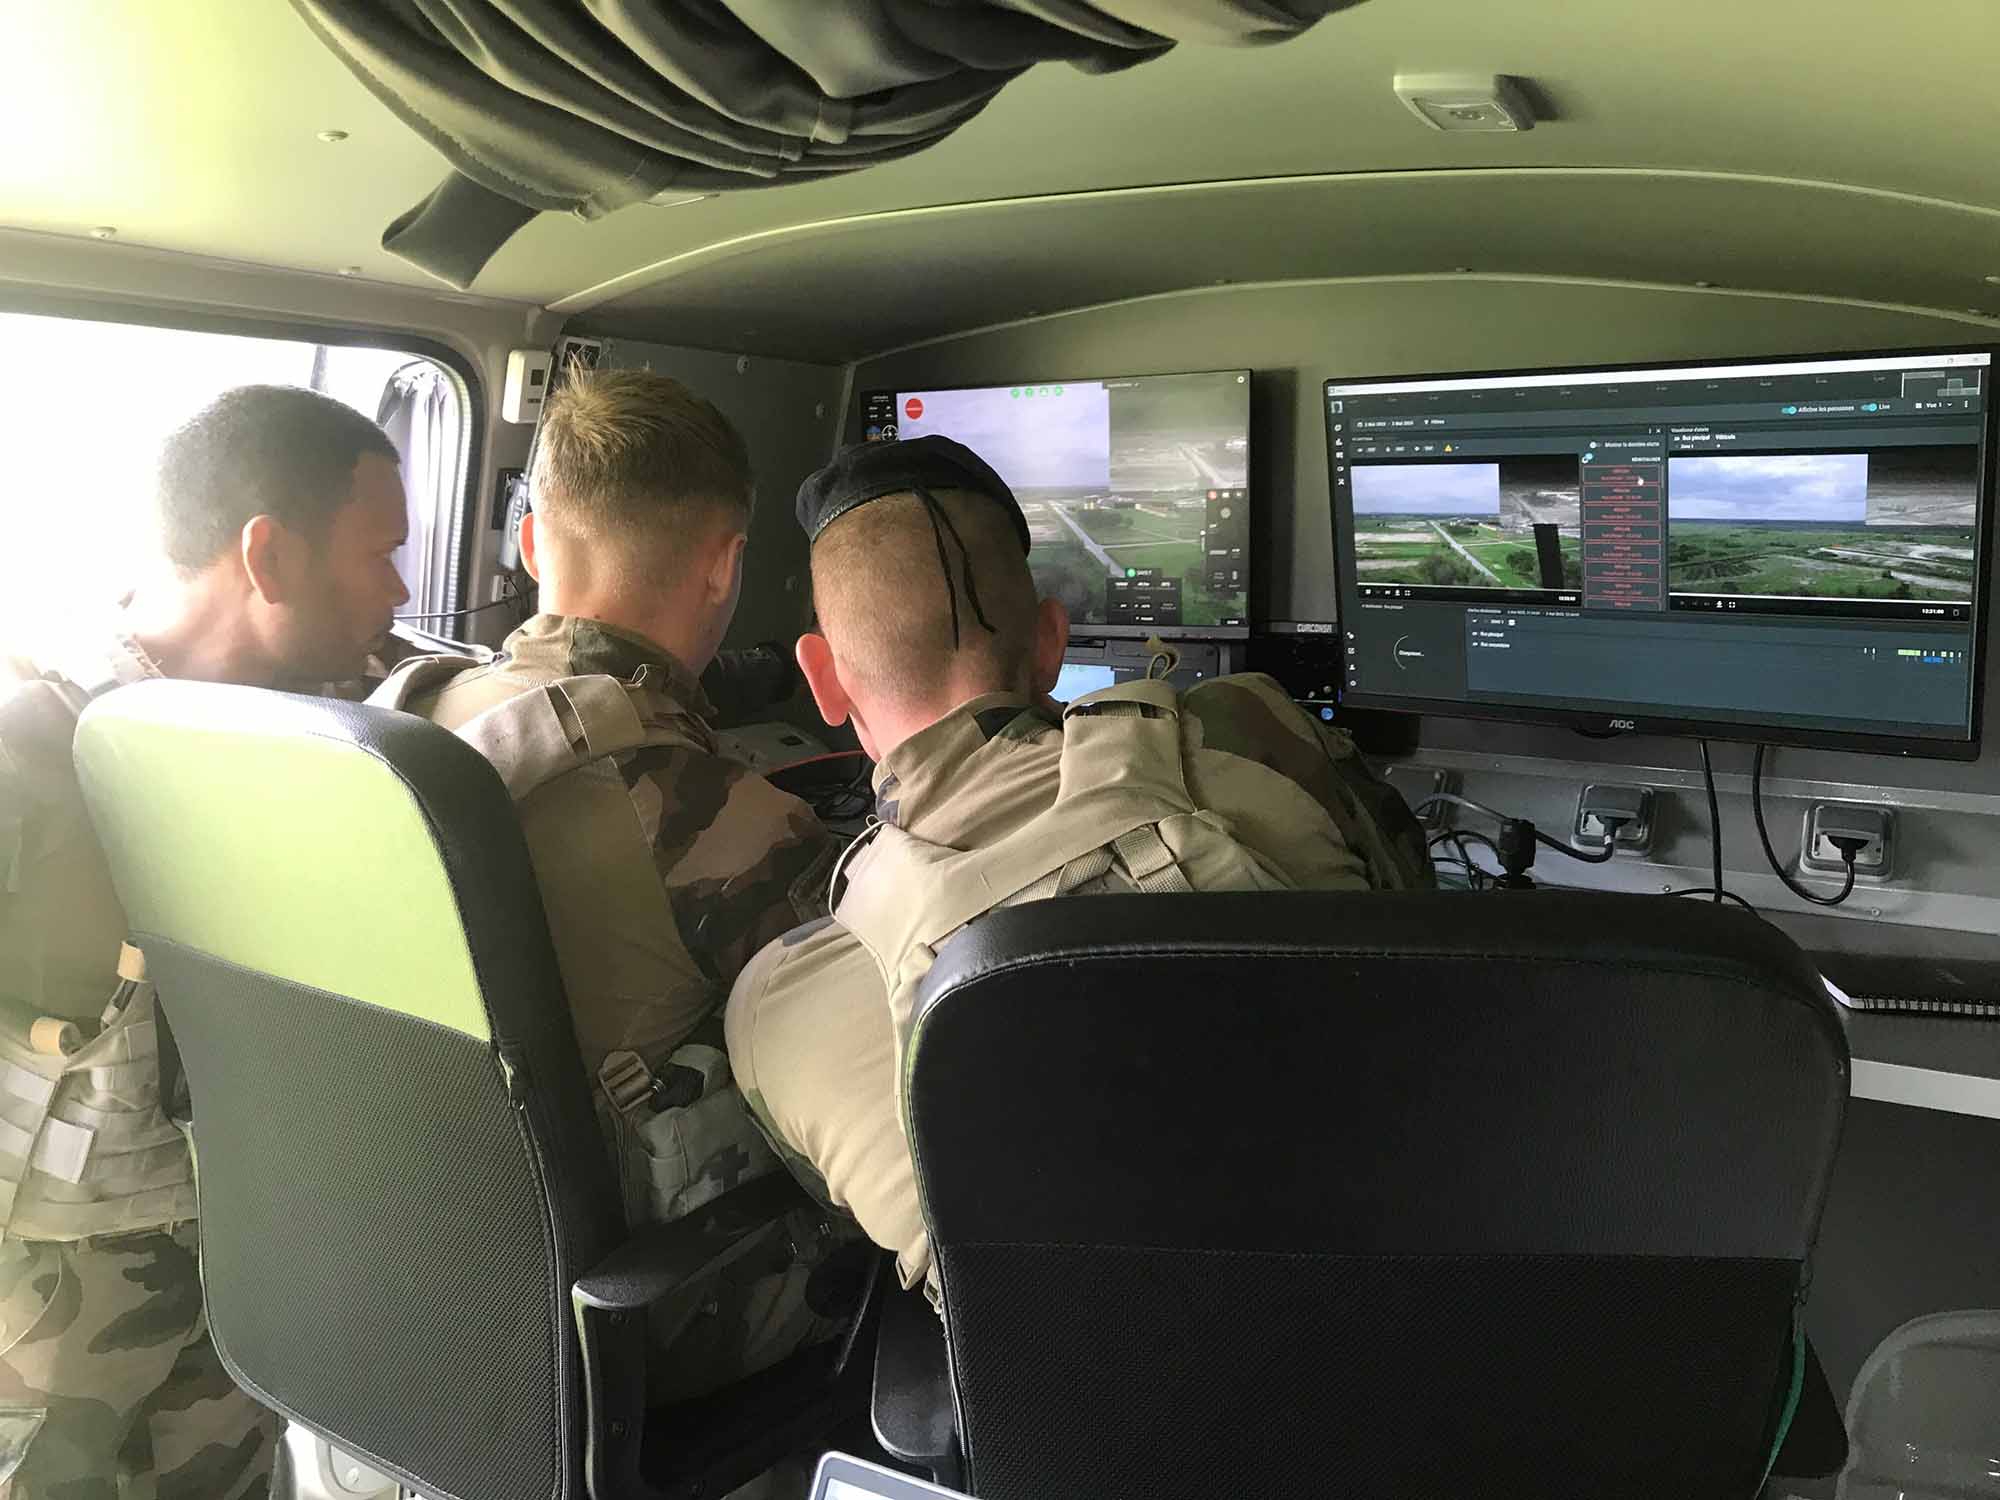 Soldiers watching video feedback from military drone